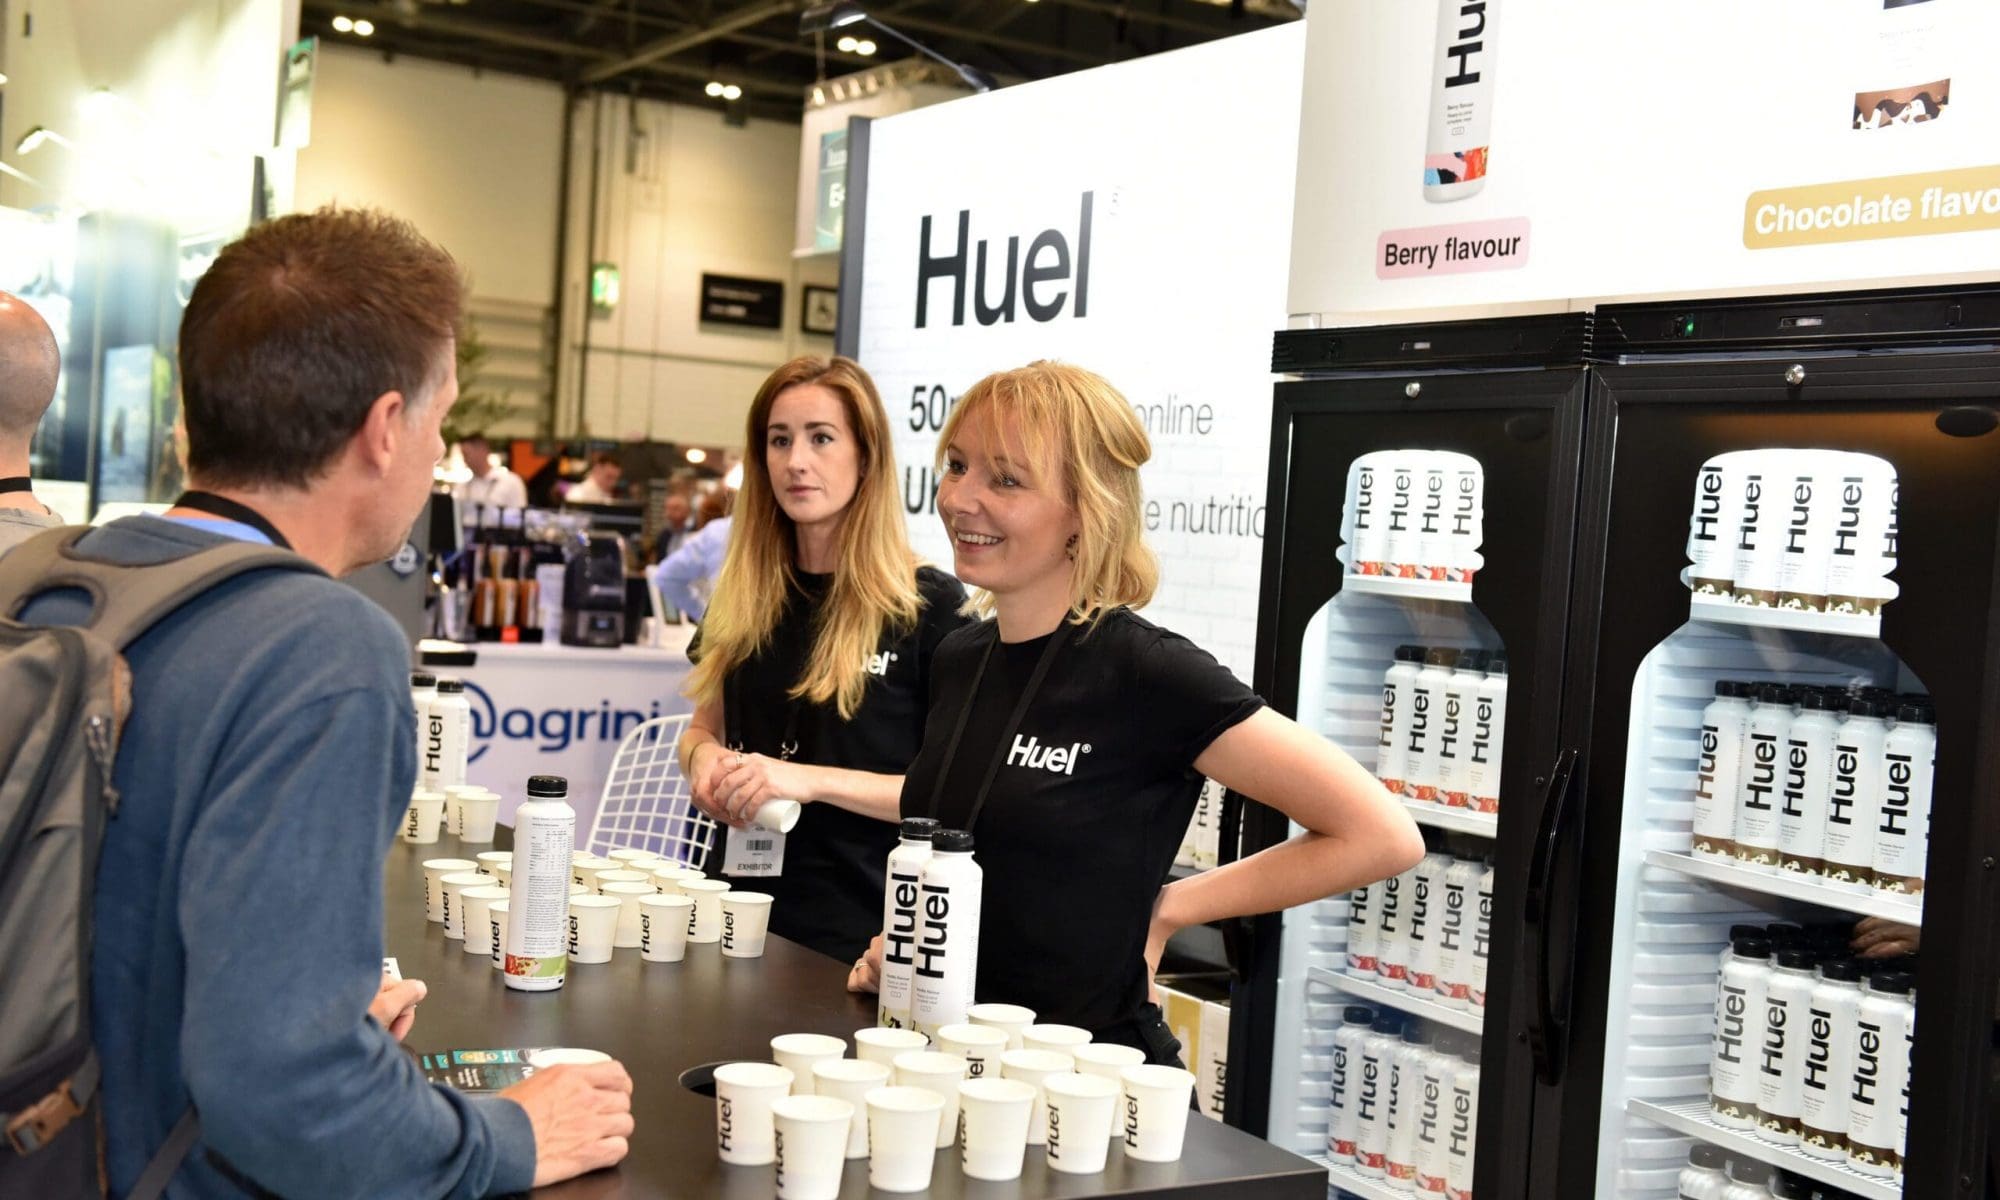 Huel Exhibition Stand